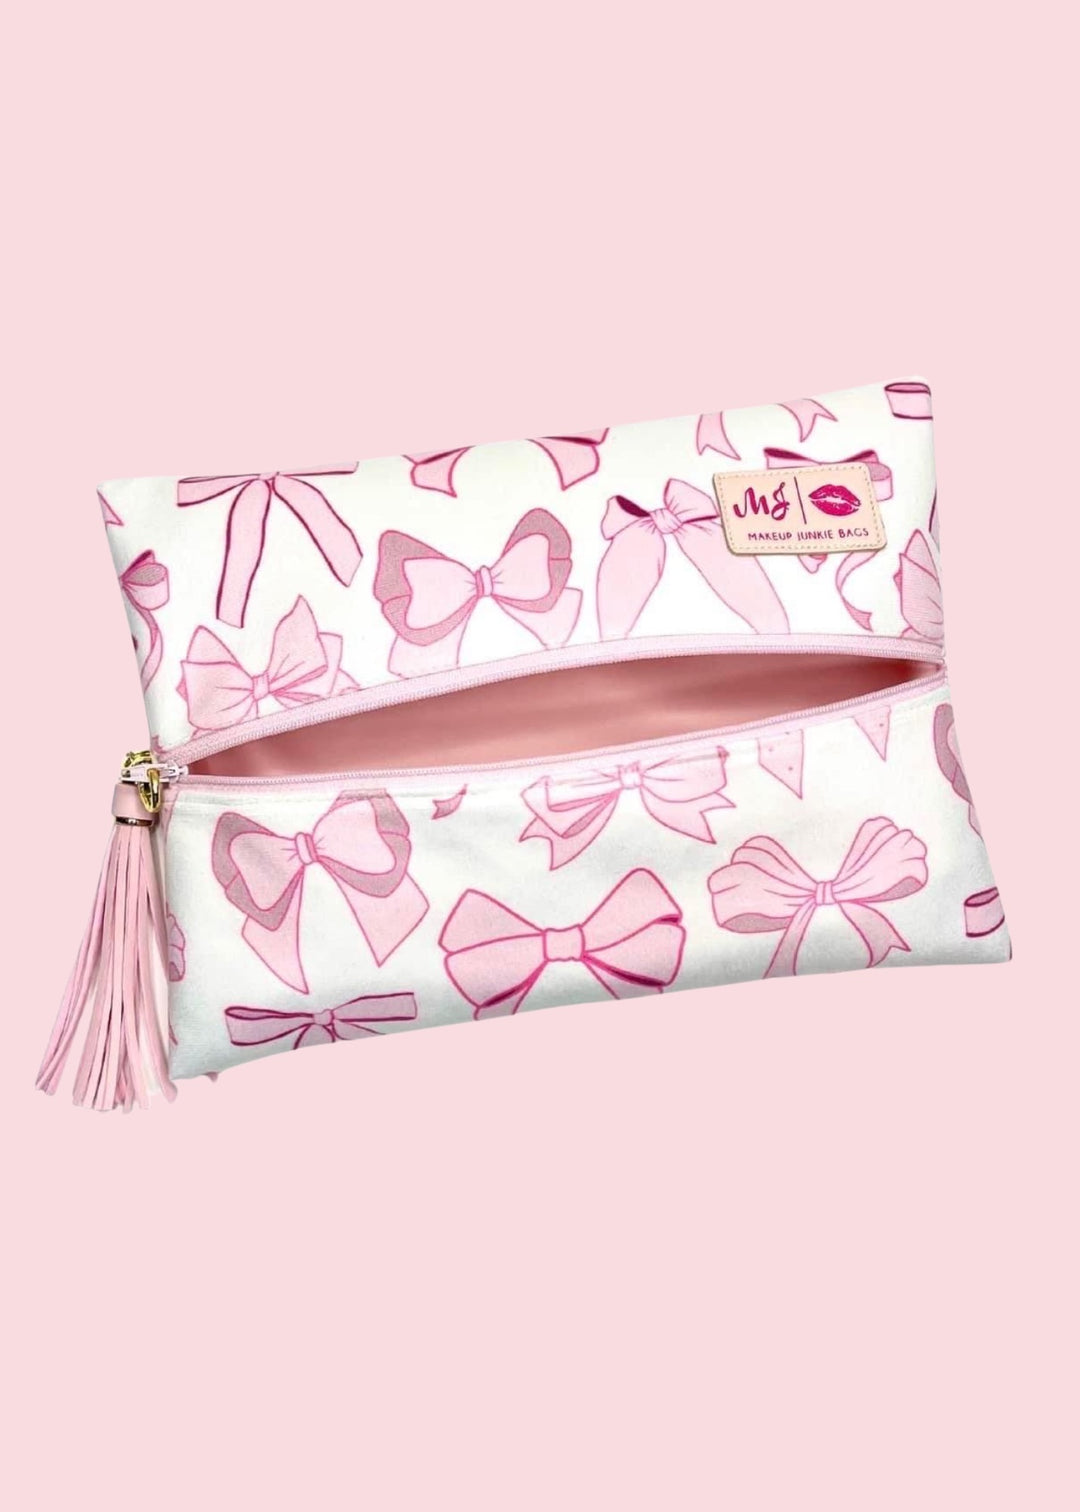 Makeup Junkie Bags - Bow Babe Flat Lay [Pre-Order]